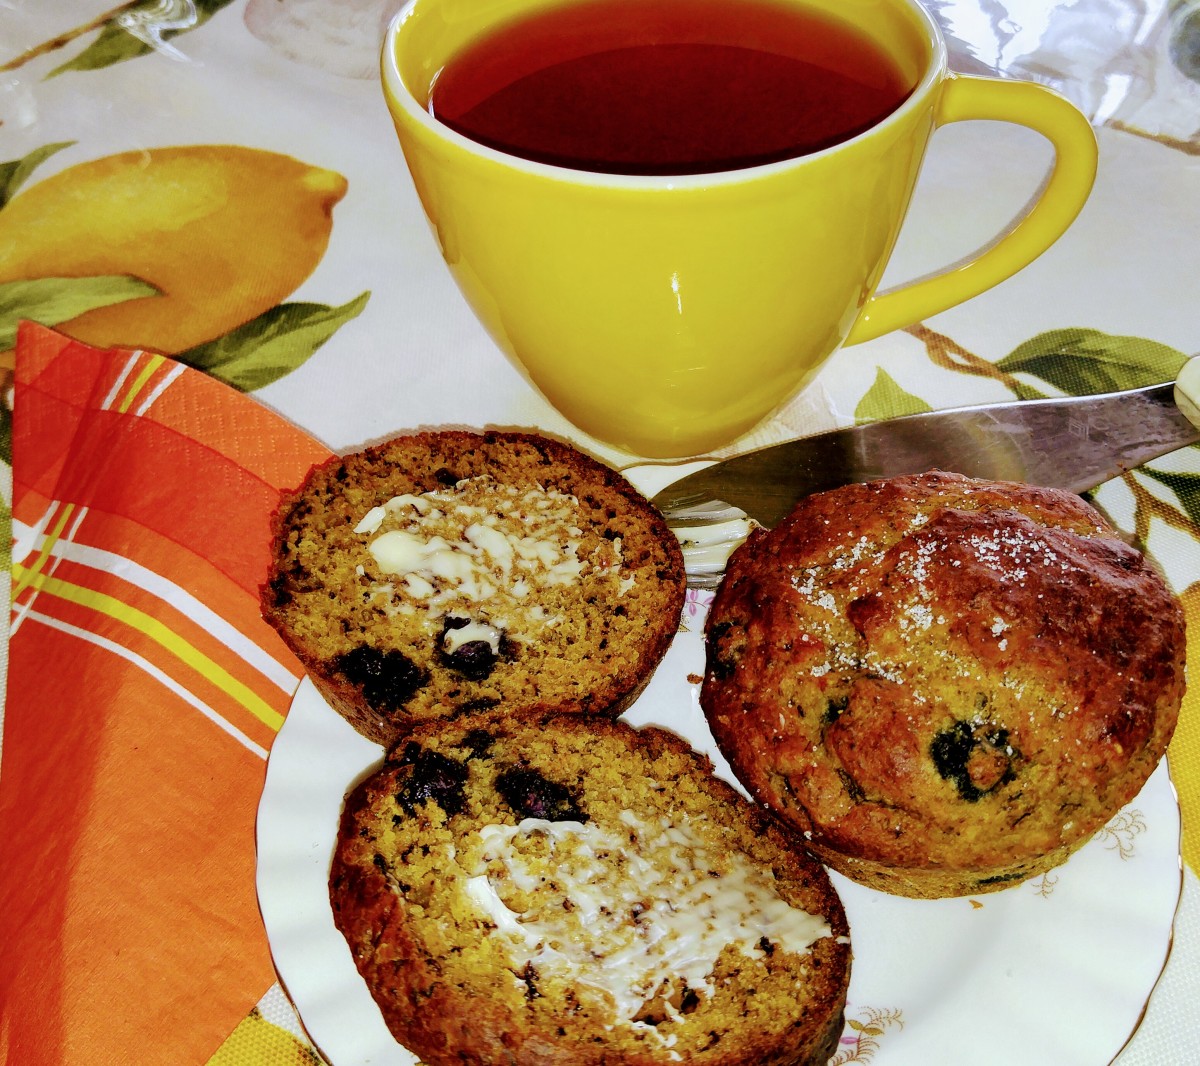 You will feel satisfied and virtuous when you breakfast on these healthy, but yummy, chia seed recipes.  (Find the Chia seed-Banana-Saskatoon-Berry muffin recipe at the bottom of the article)